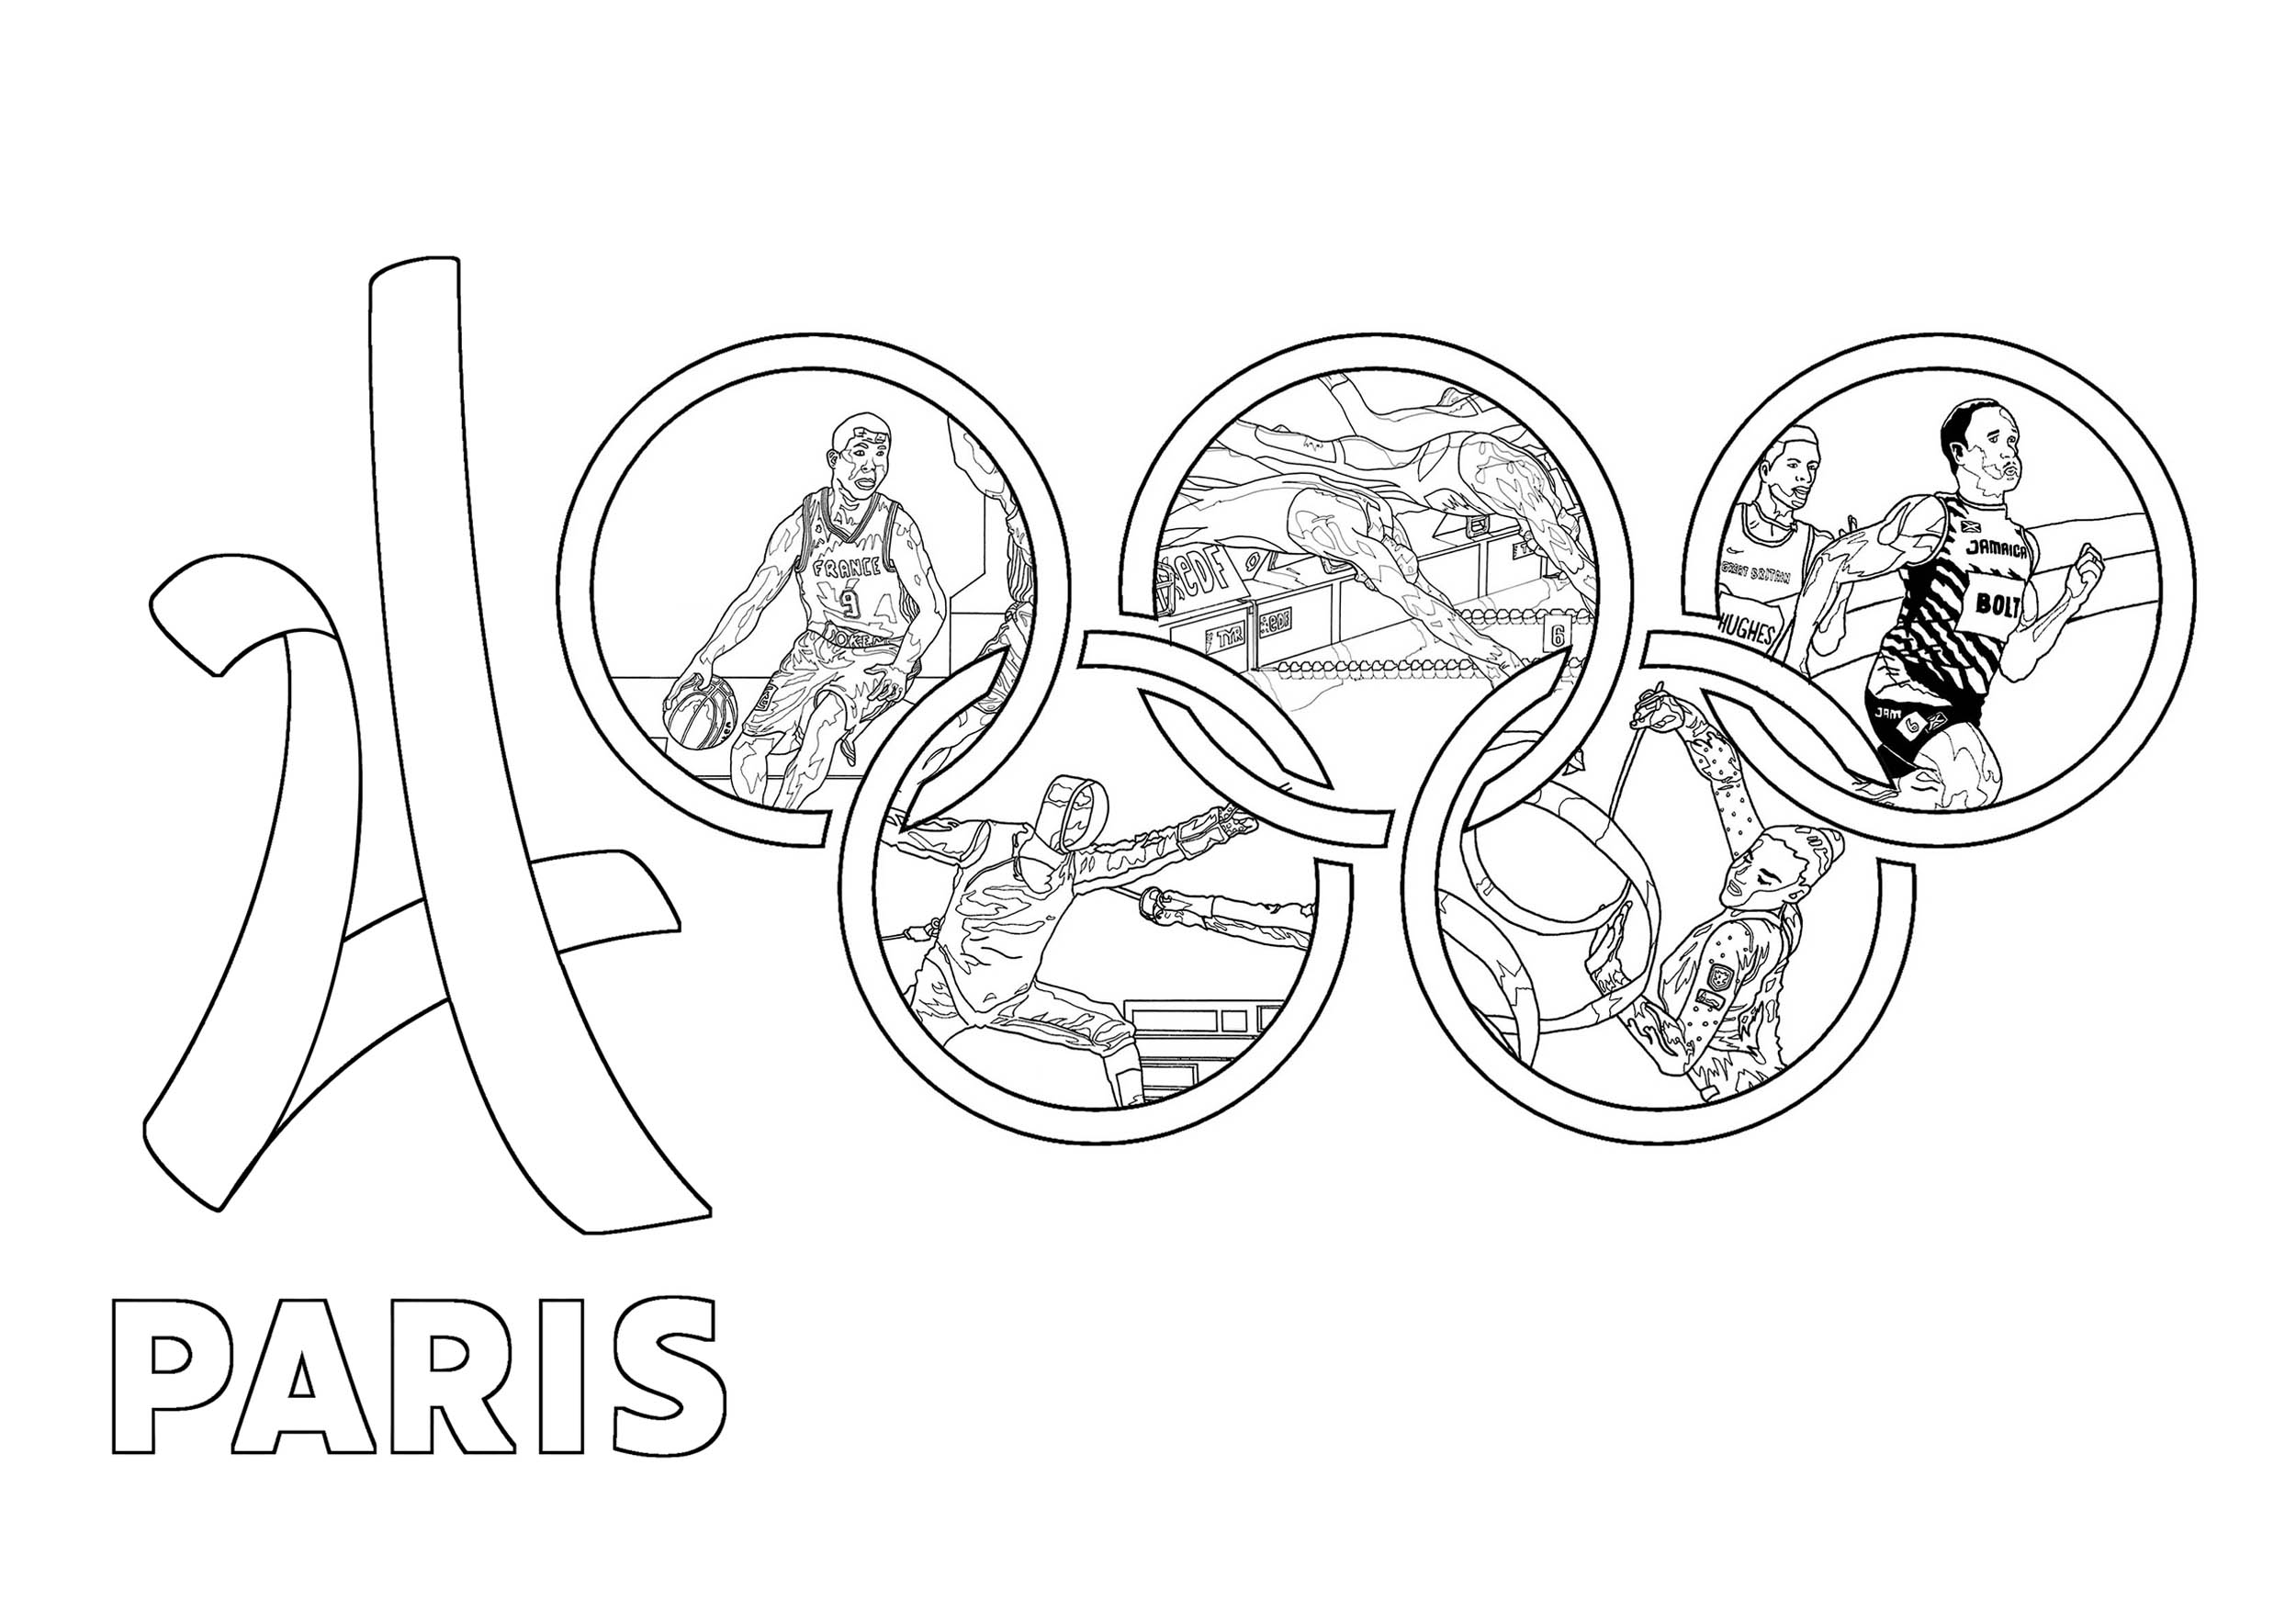 Coloring for the Olympic Games of Paris 2024 Olympic (and sport